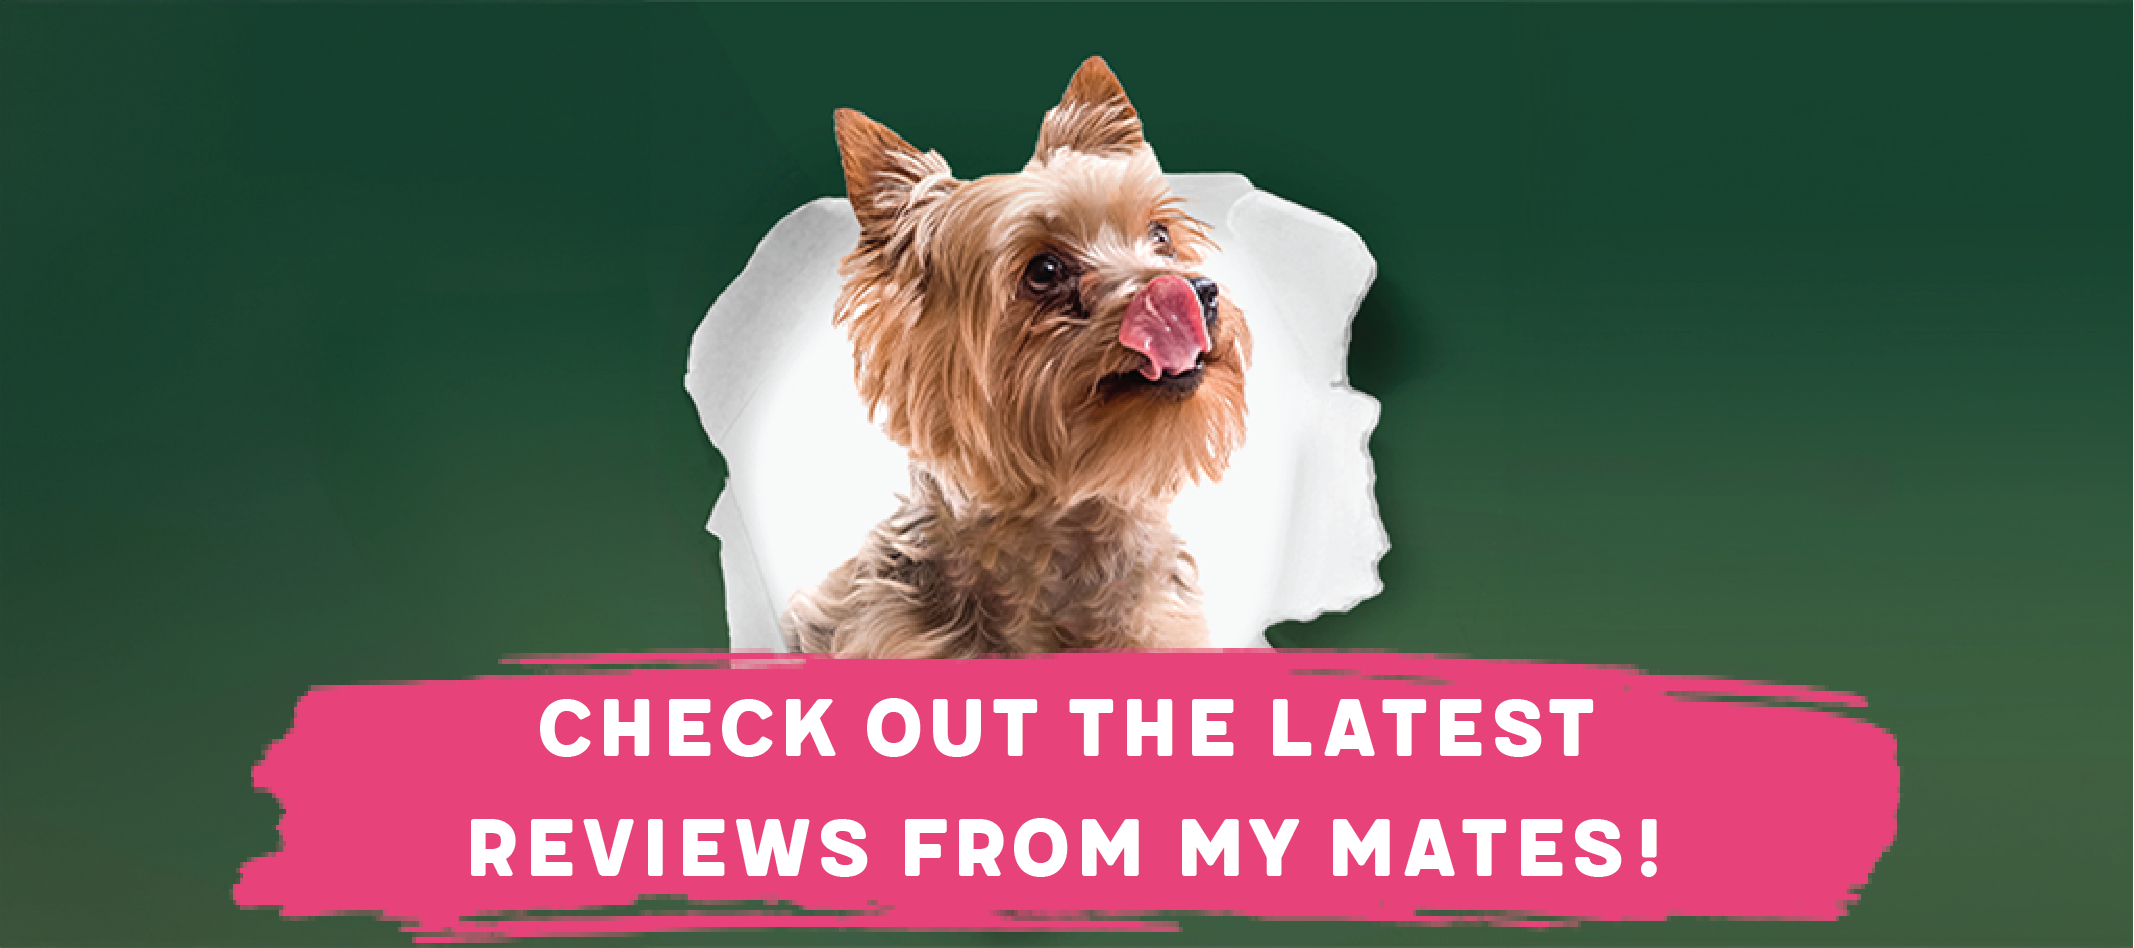 Woof-tastic Reviews from Us Doggos: Pawsitively Posh Nosh at Harringtons!